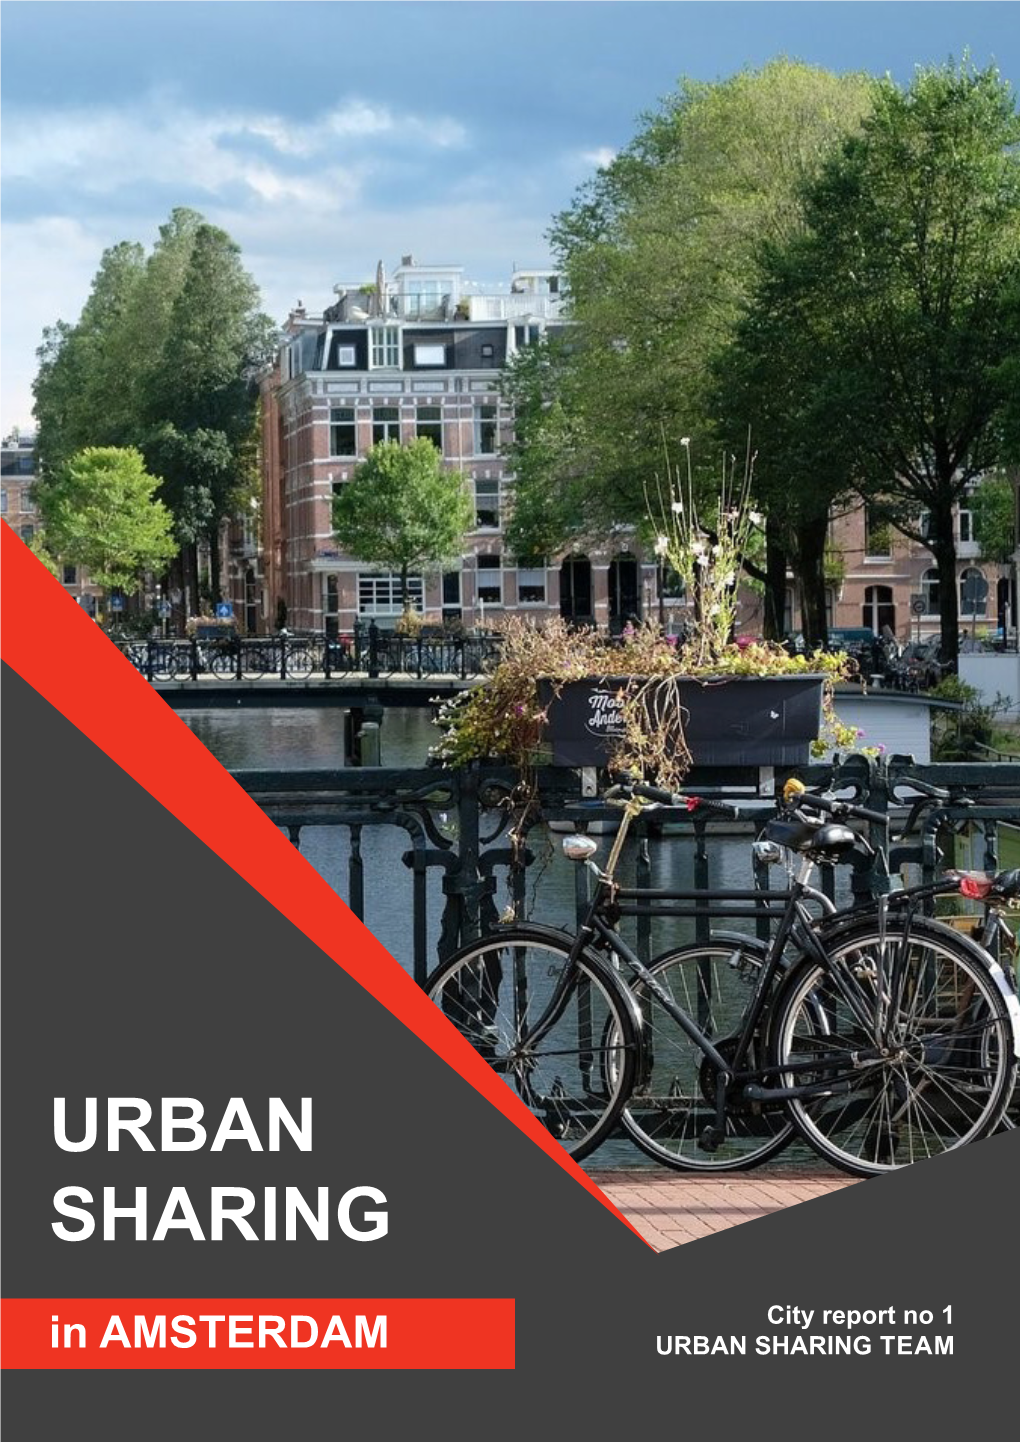 URBAN SHARING in Amsterdam City Report No 1 by URBAN SHARING TEAM 2019: 1